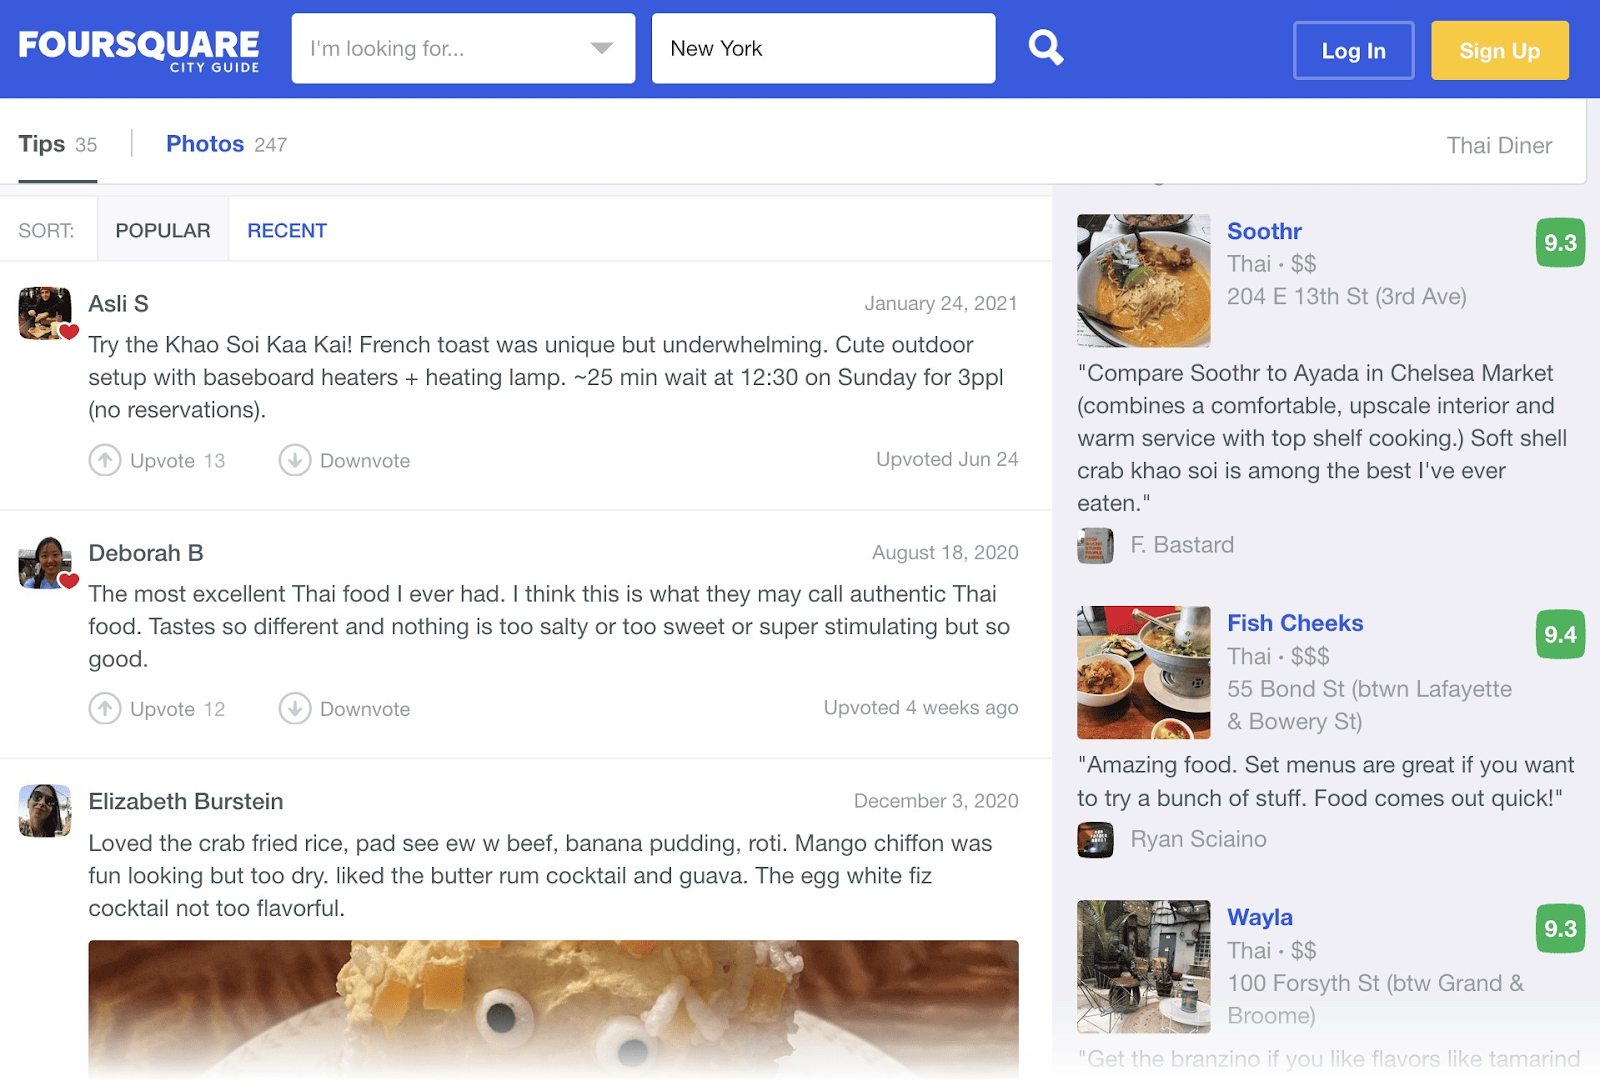 Foursquare's page showing "Tips" for restaurants in New York